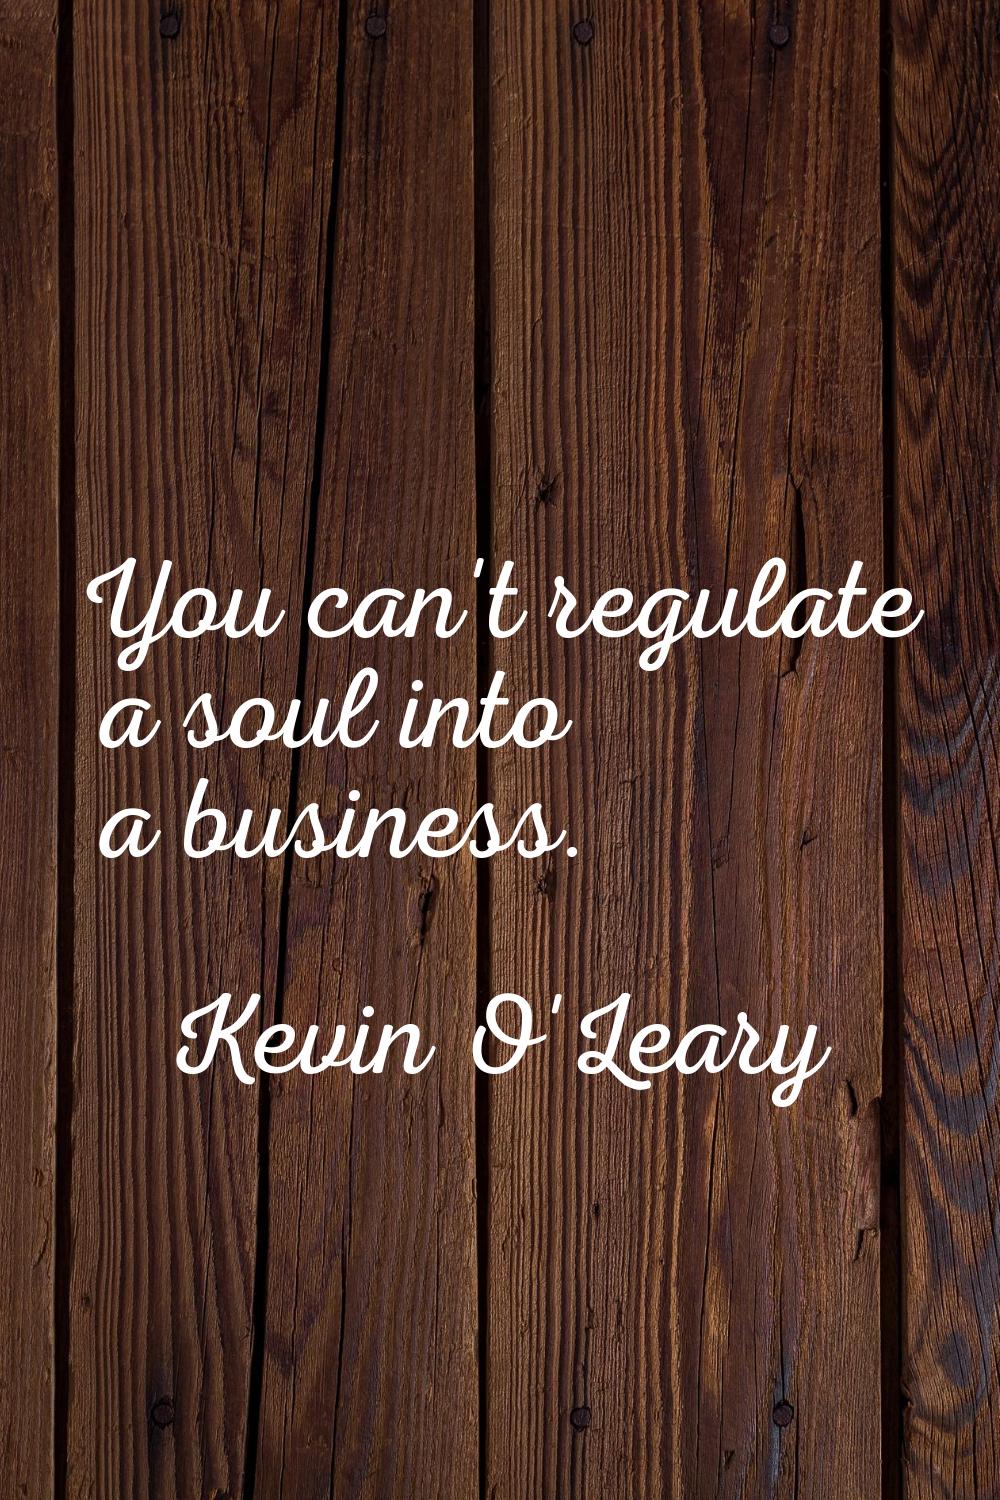 You can't regulate a soul into a business.